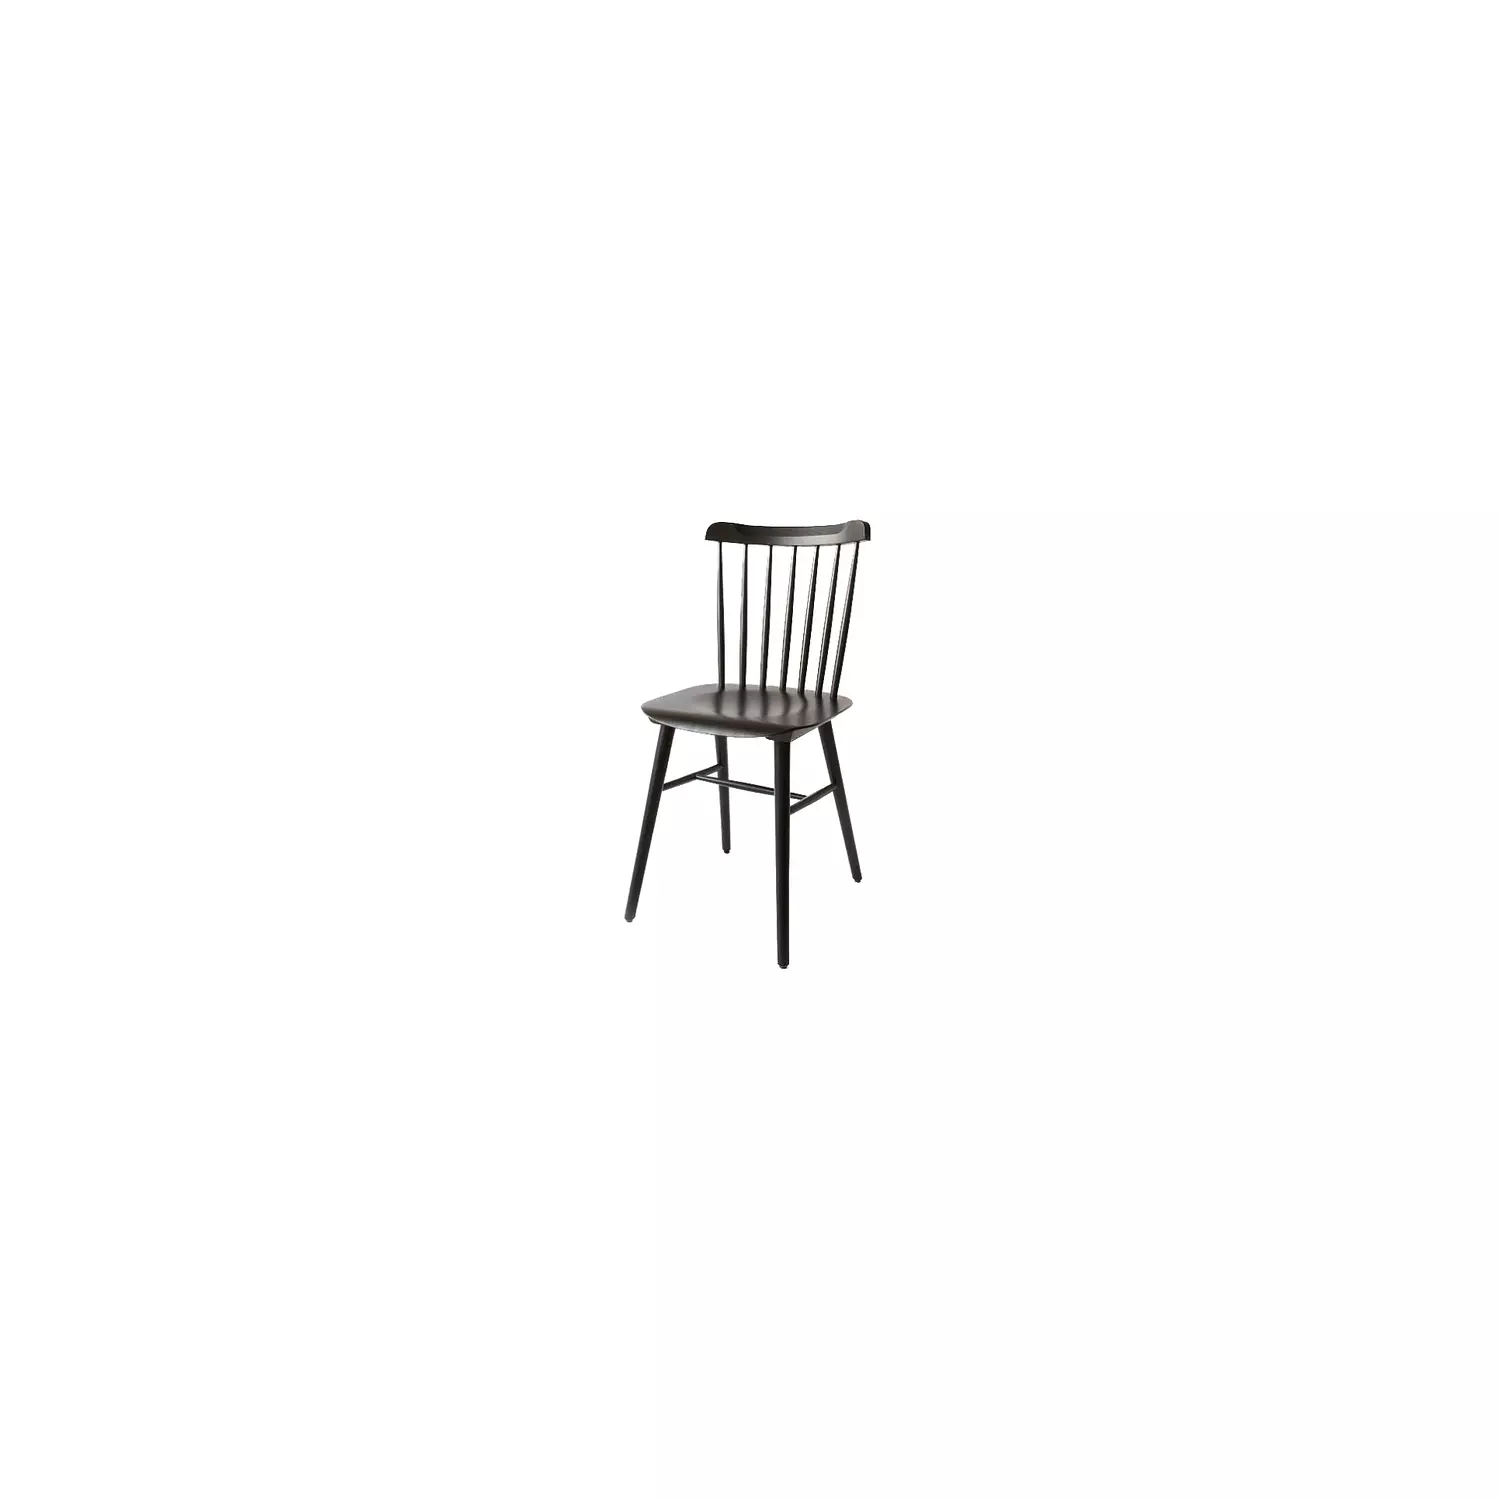 WINDSOR CHAIR hover image